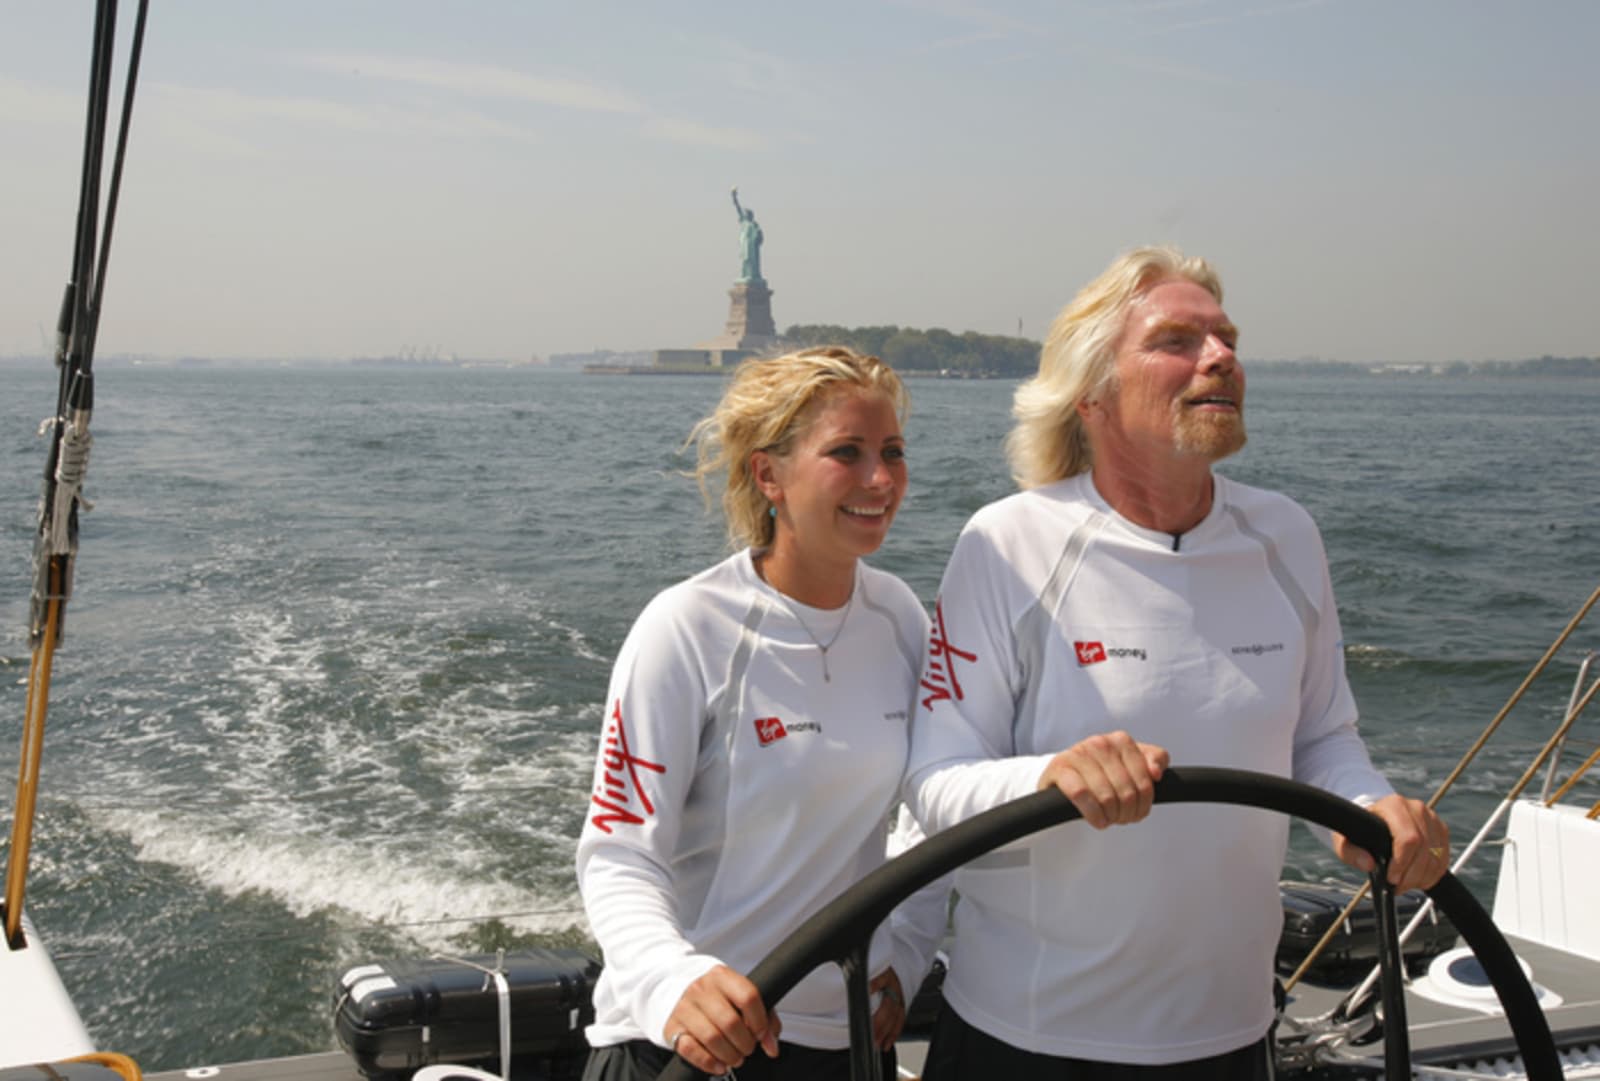 Richard Branson and Holly Branson in New York City for the Virgin Money Sail Challenge